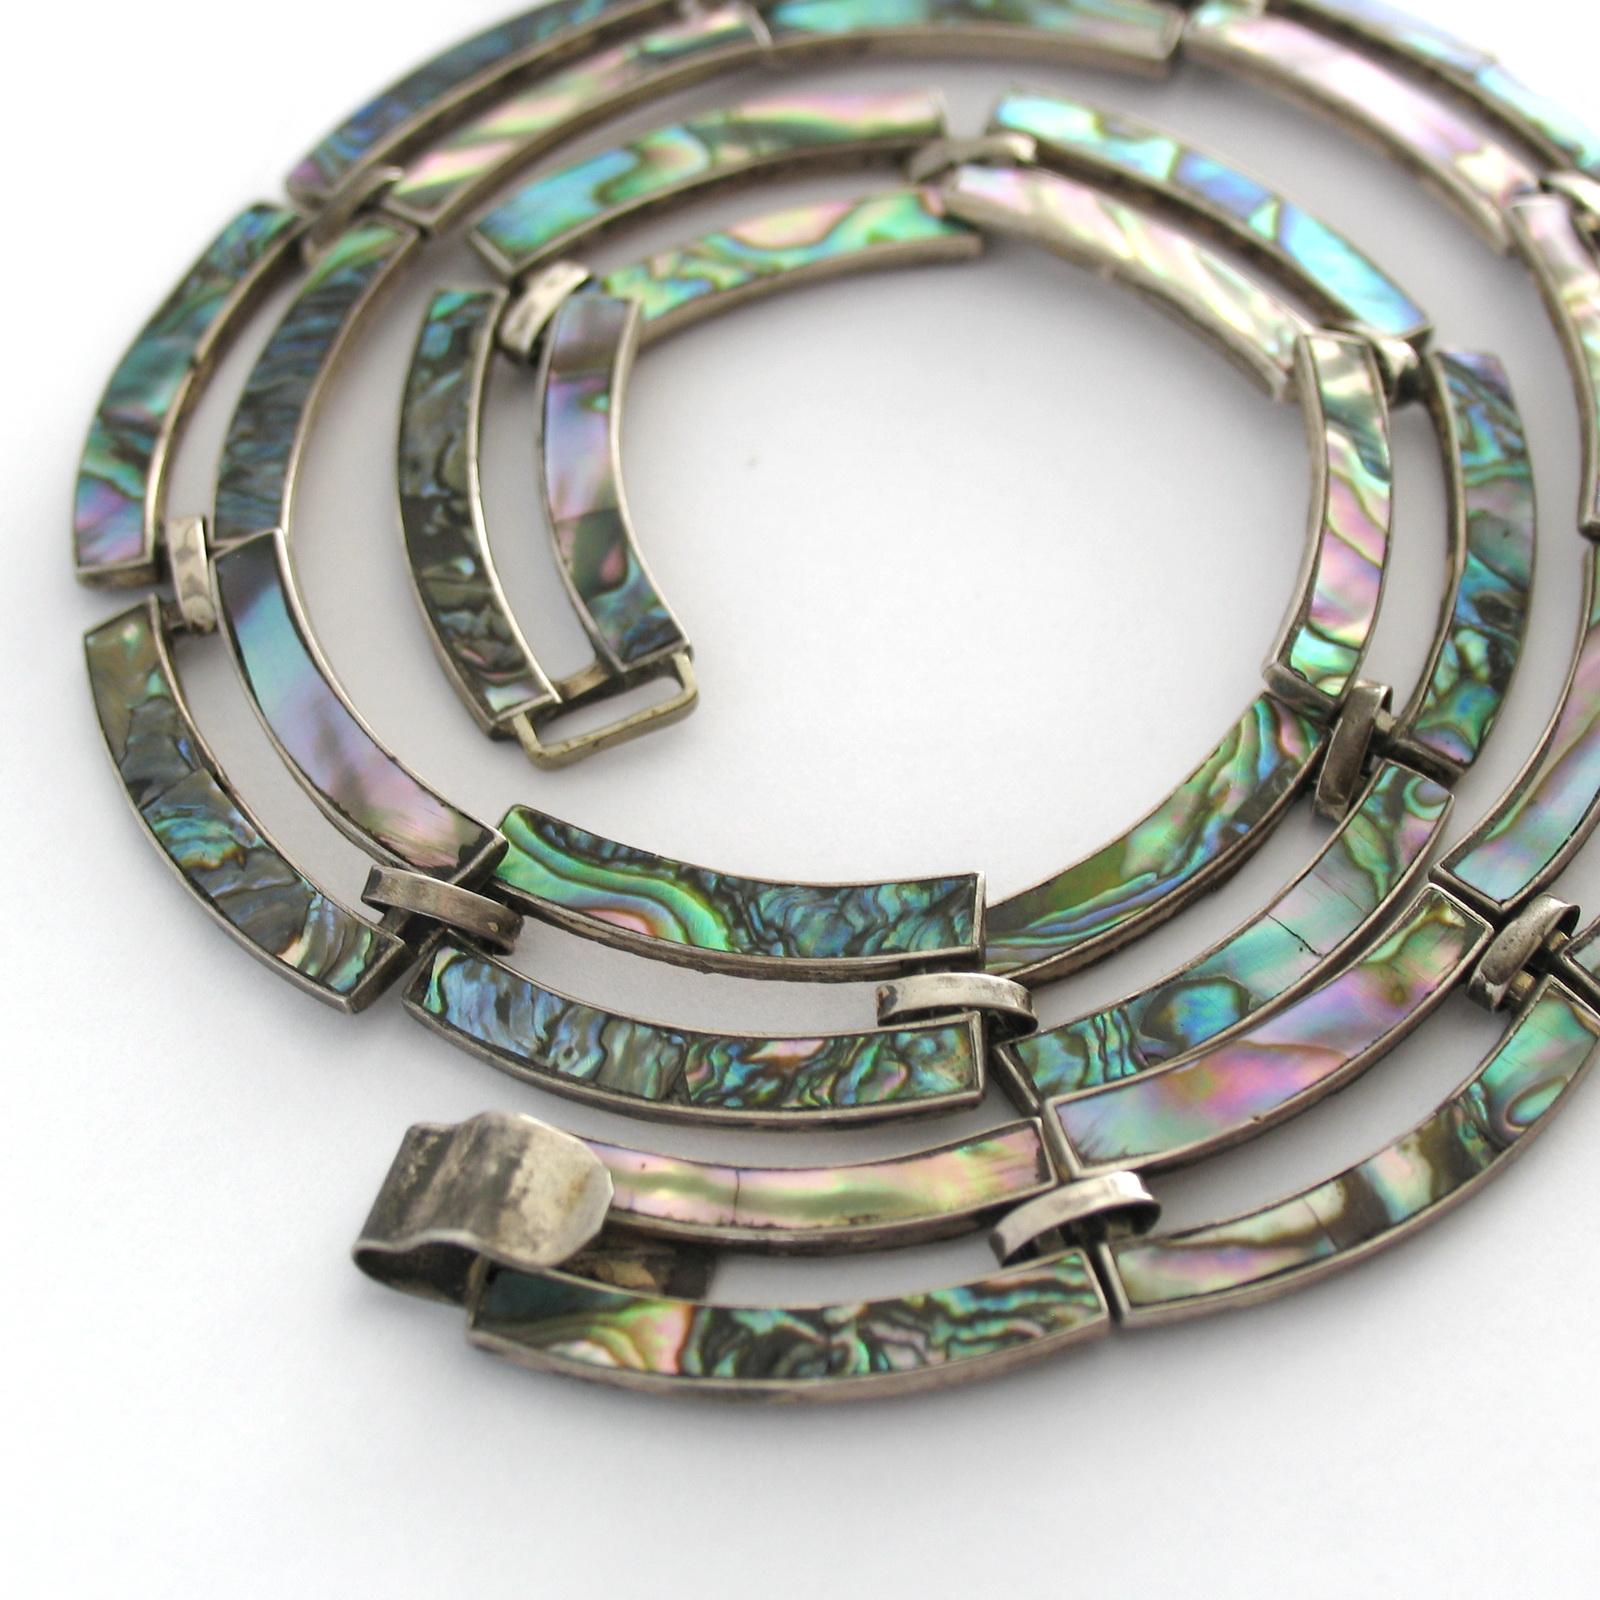 Mid-17th Century Art Deco Silver Necklace with Mother of Pearl Inlay by Taxco Mexico